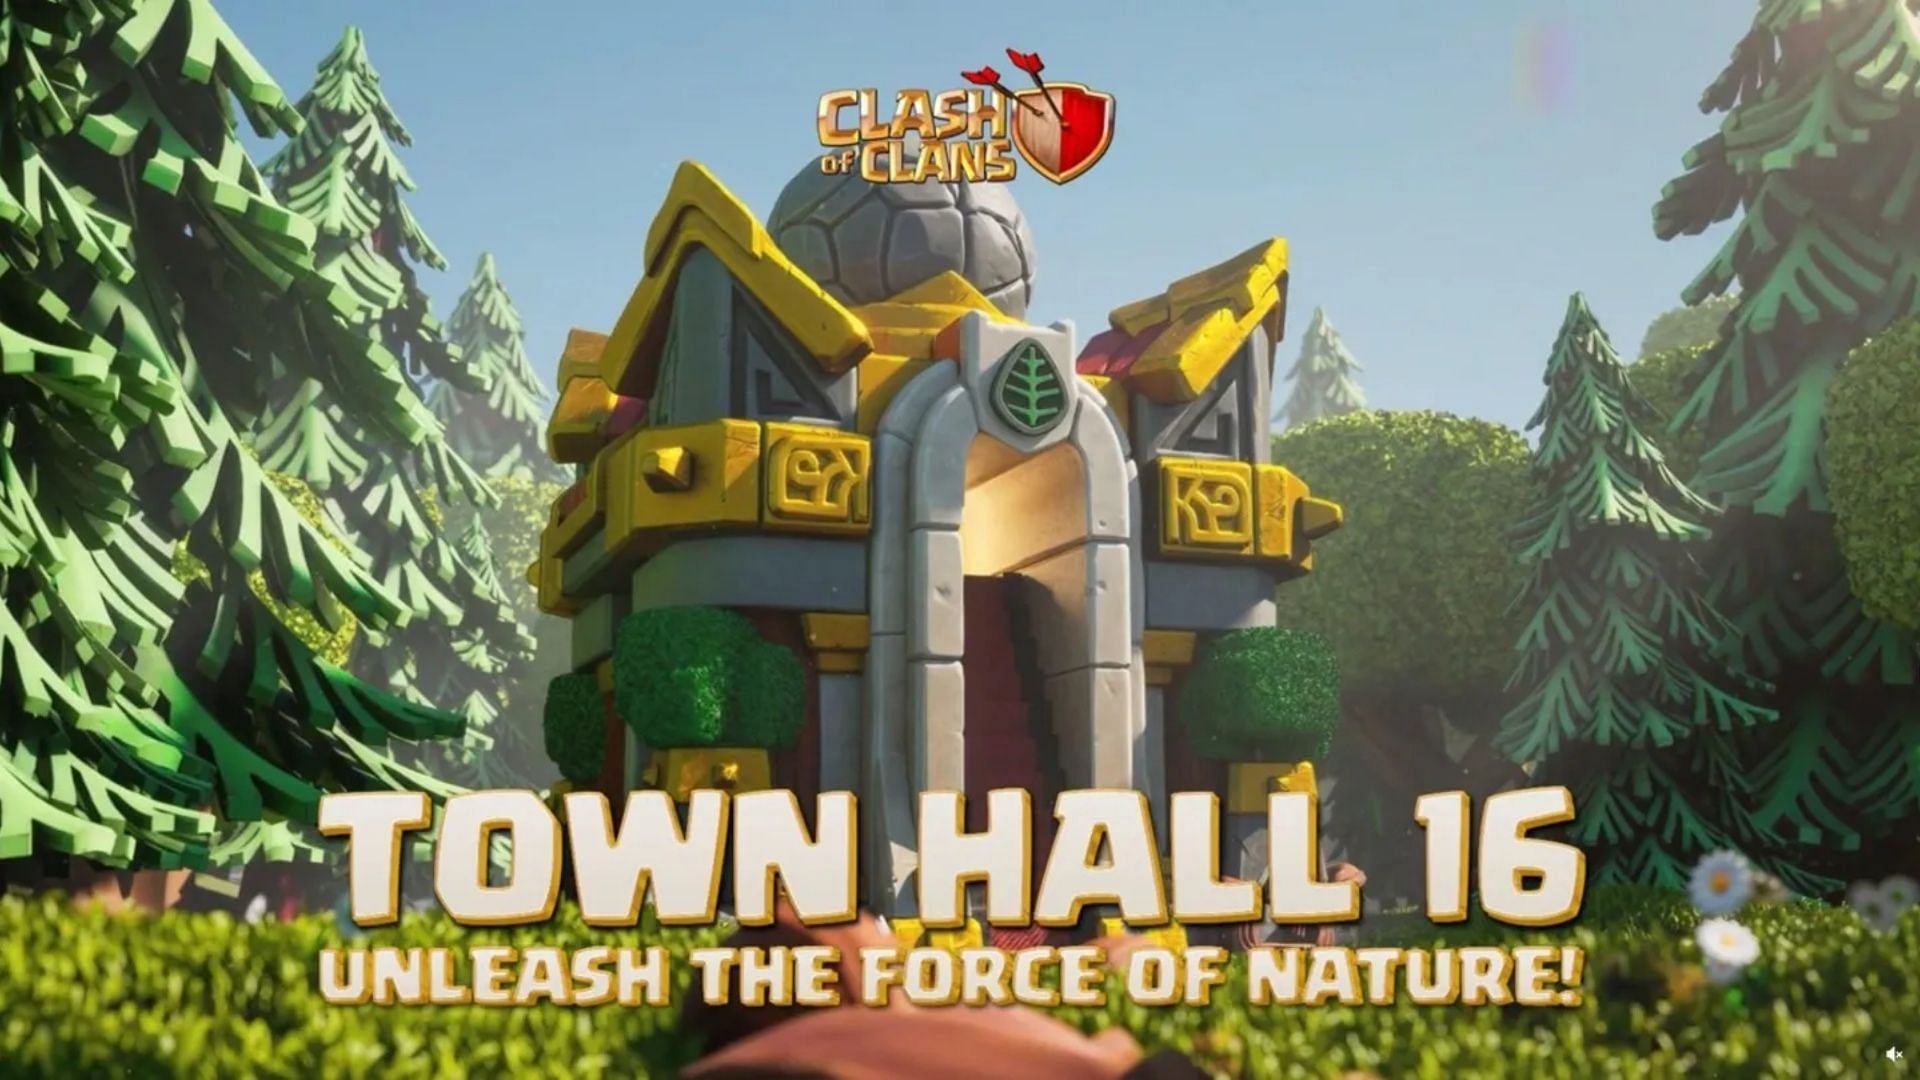 A new update is coming soon in Clash of Clans (Image via Supercell)